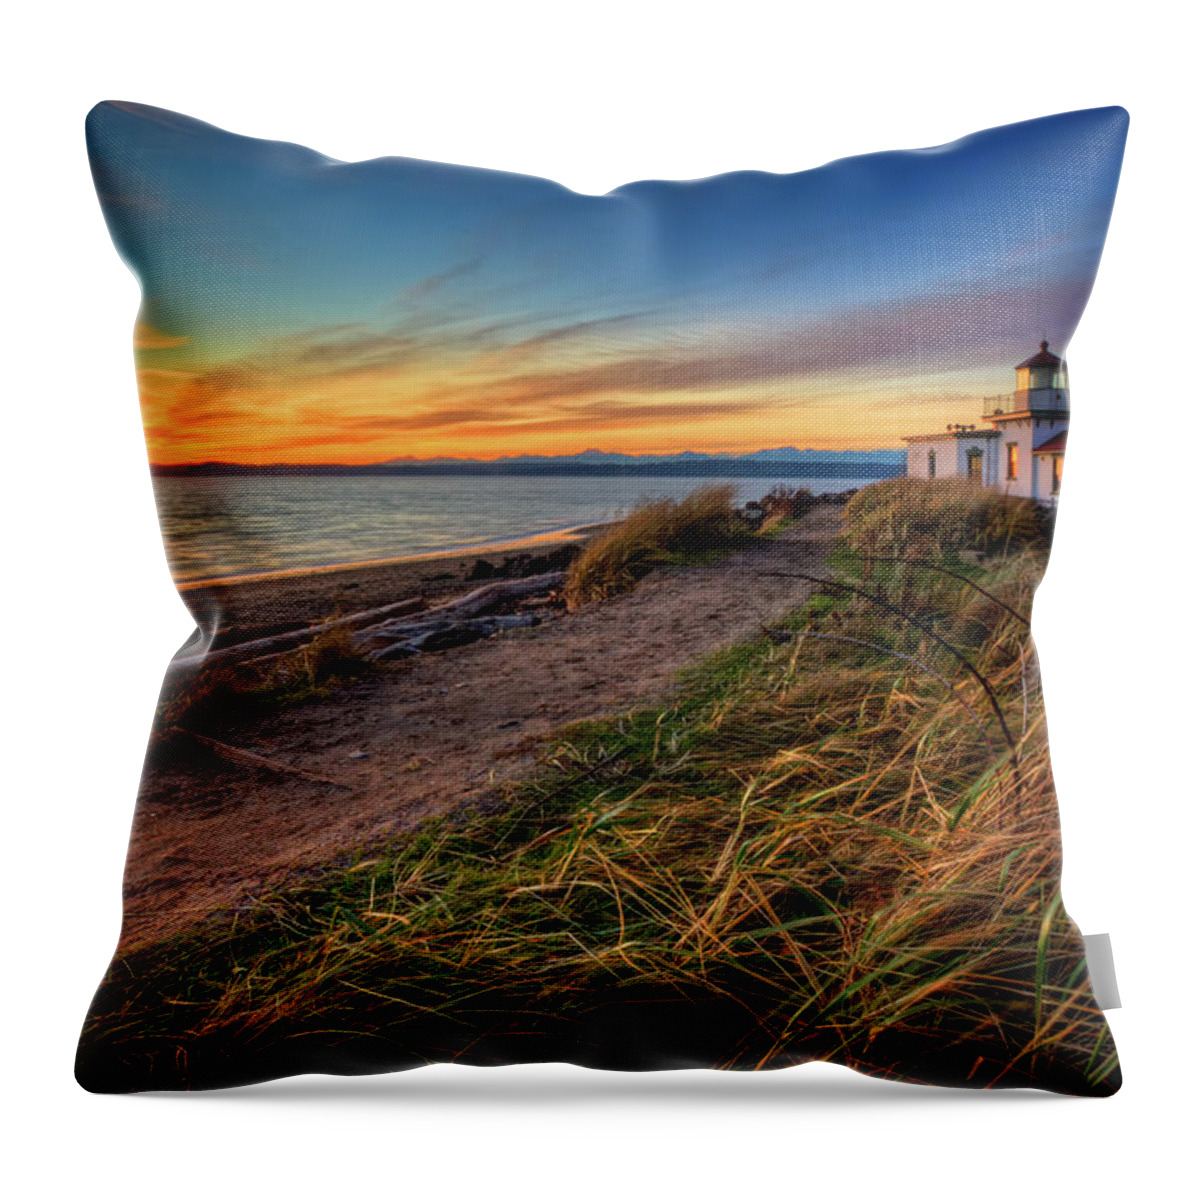 Scenics Throw Pillow featuring the photograph Lighthouse At Sunset by Photo By David R Irons Jr